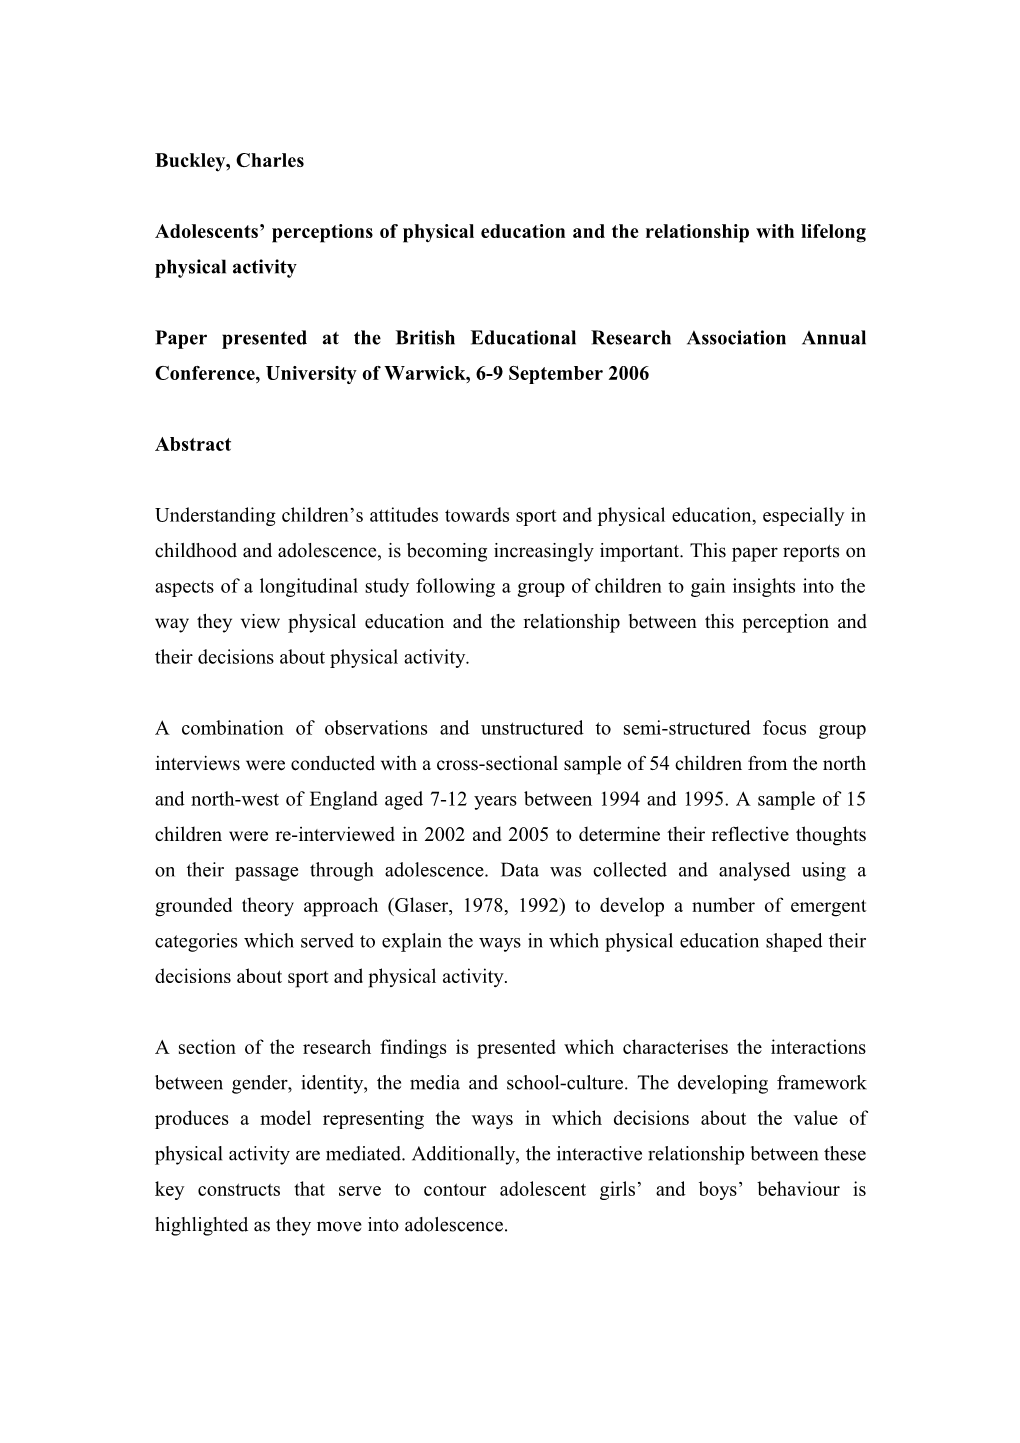 Adolescents Perceptions of Physical Education and the Relationship with Lifelong Physical